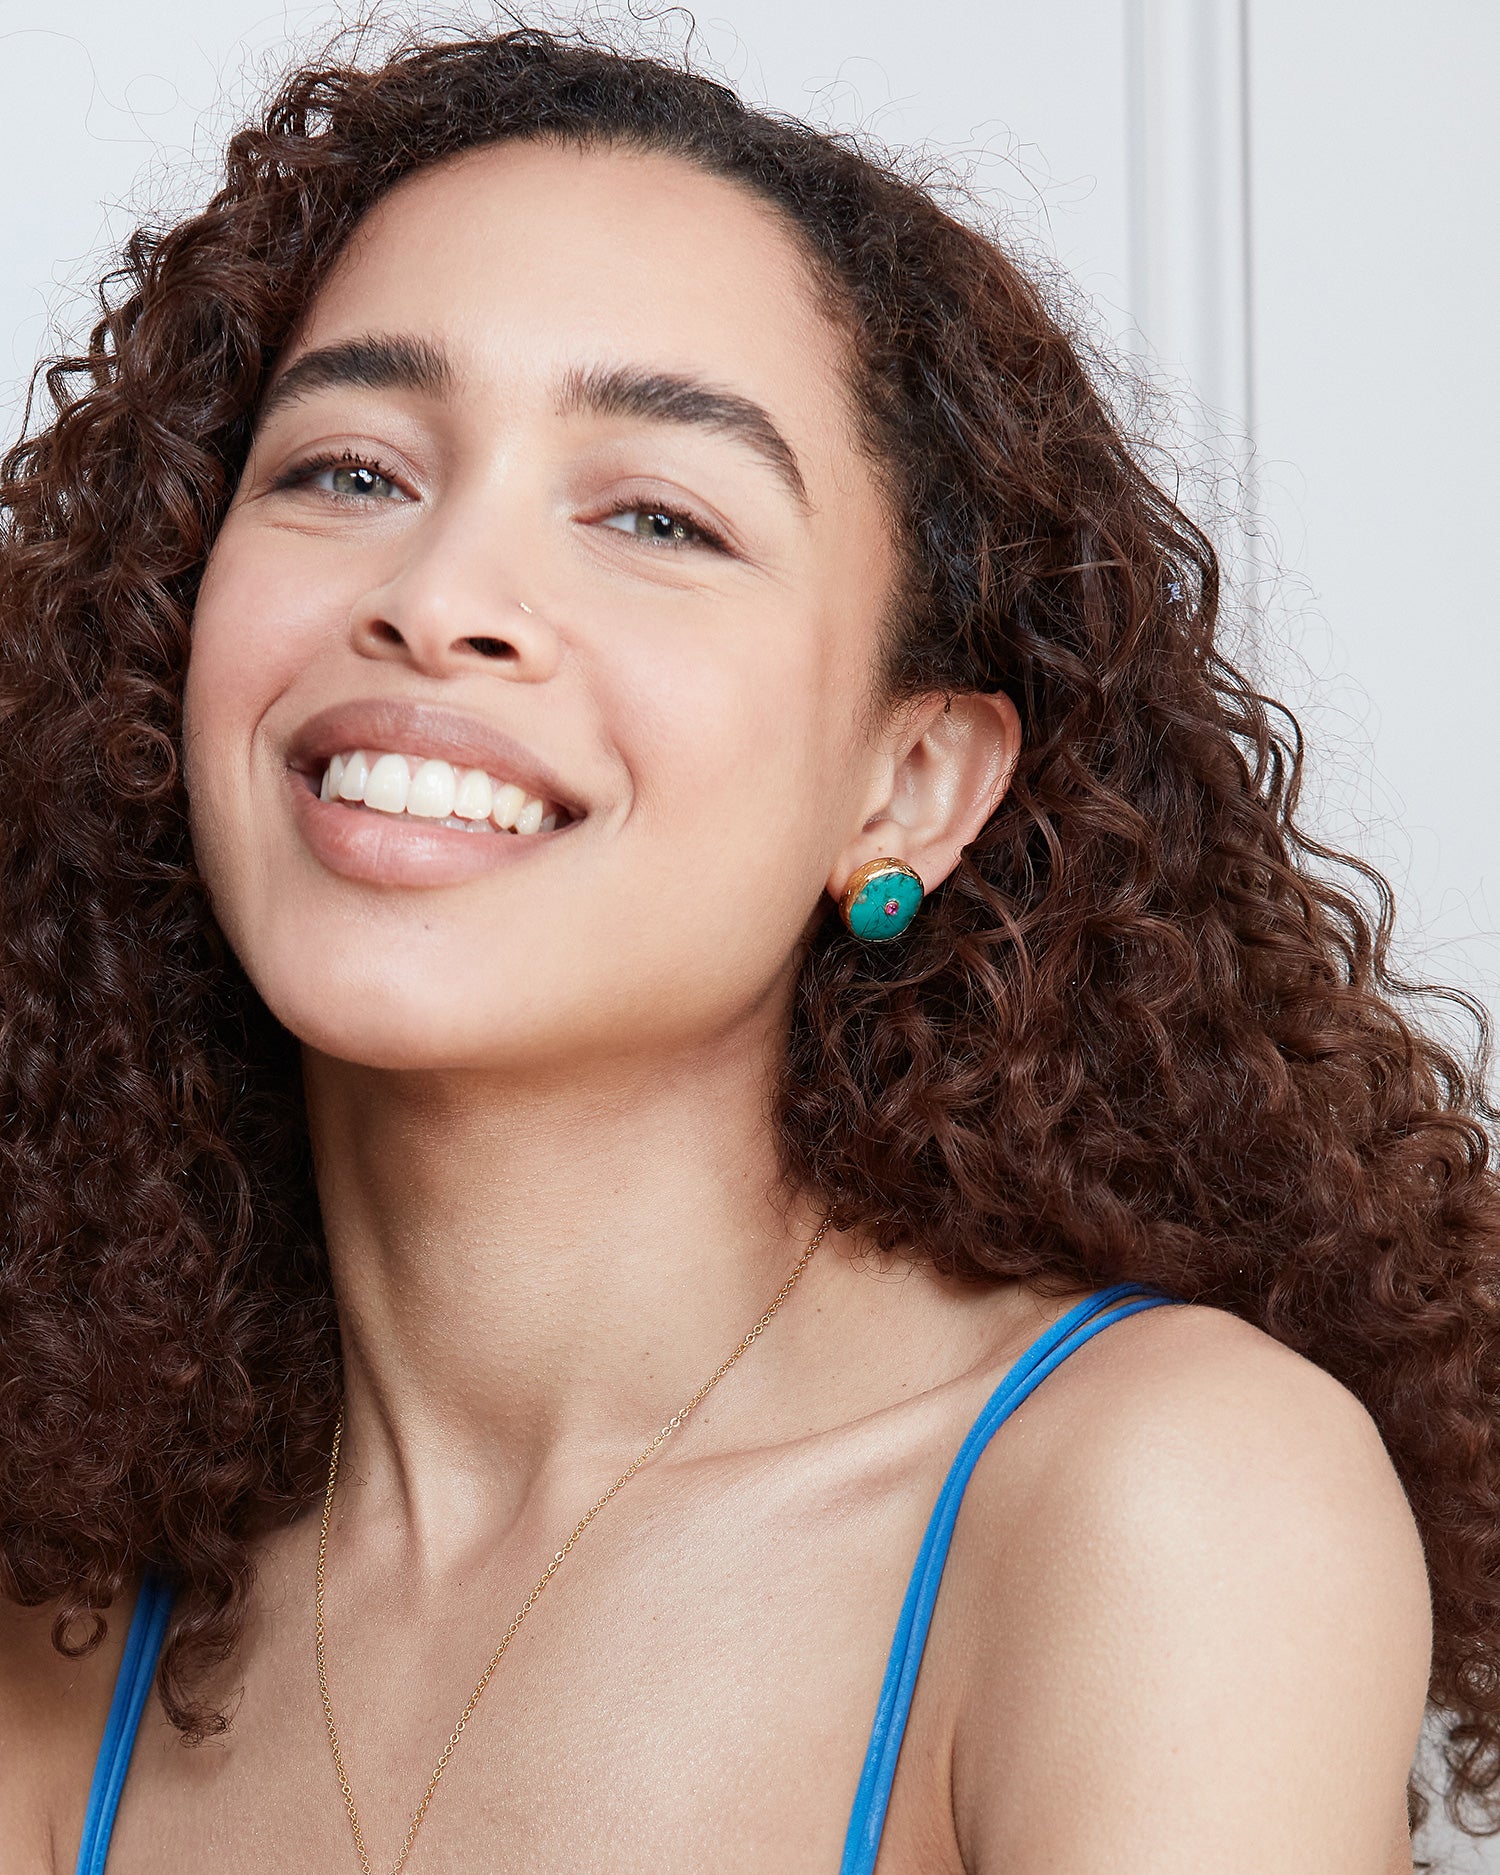 14 Best Turquoise Earrings: Retrouvaí, Piaget, and More